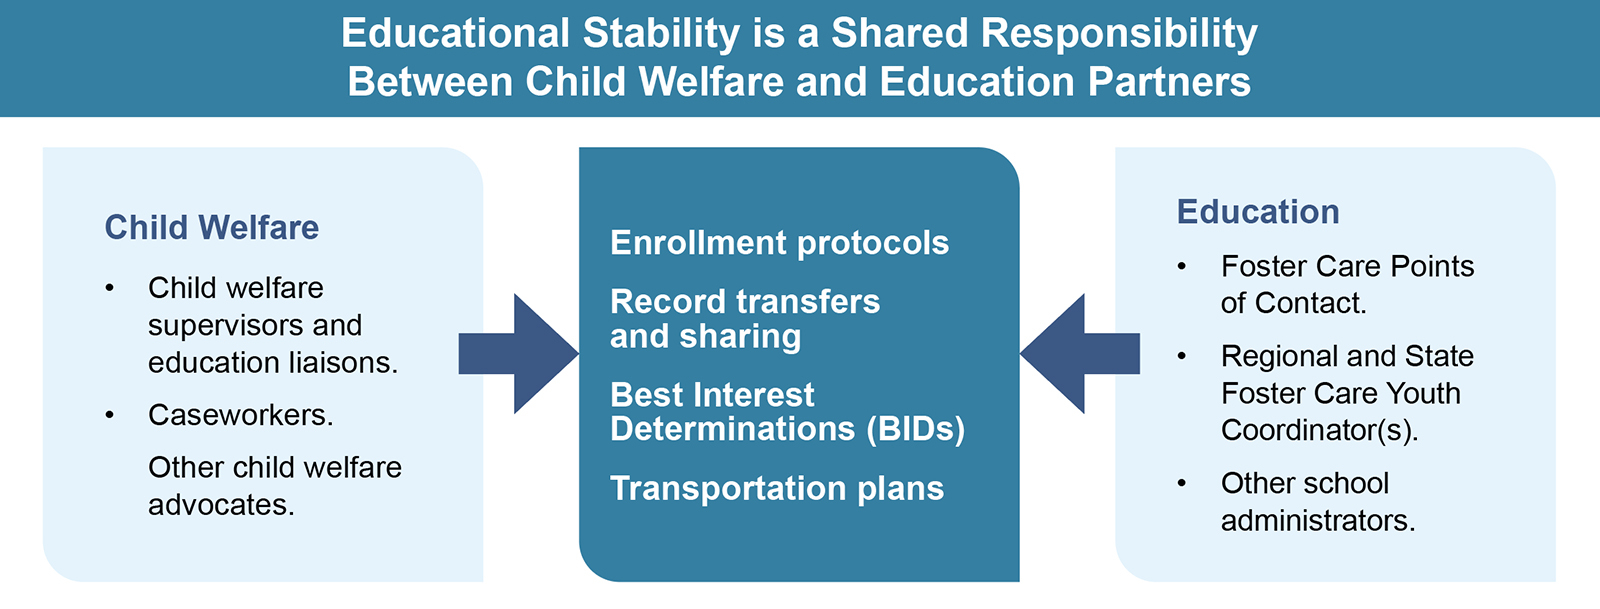 flow chart entitled Educational Stability is a Shared Responsibility Between Child Welfare and Education Partners that visually shows how Child welfare and education partners can help ensure educational stability by sharing responsibility of enrollment protocols, record transfers and sharing, Best Interest Determinations (BIDs), and transportation plans.